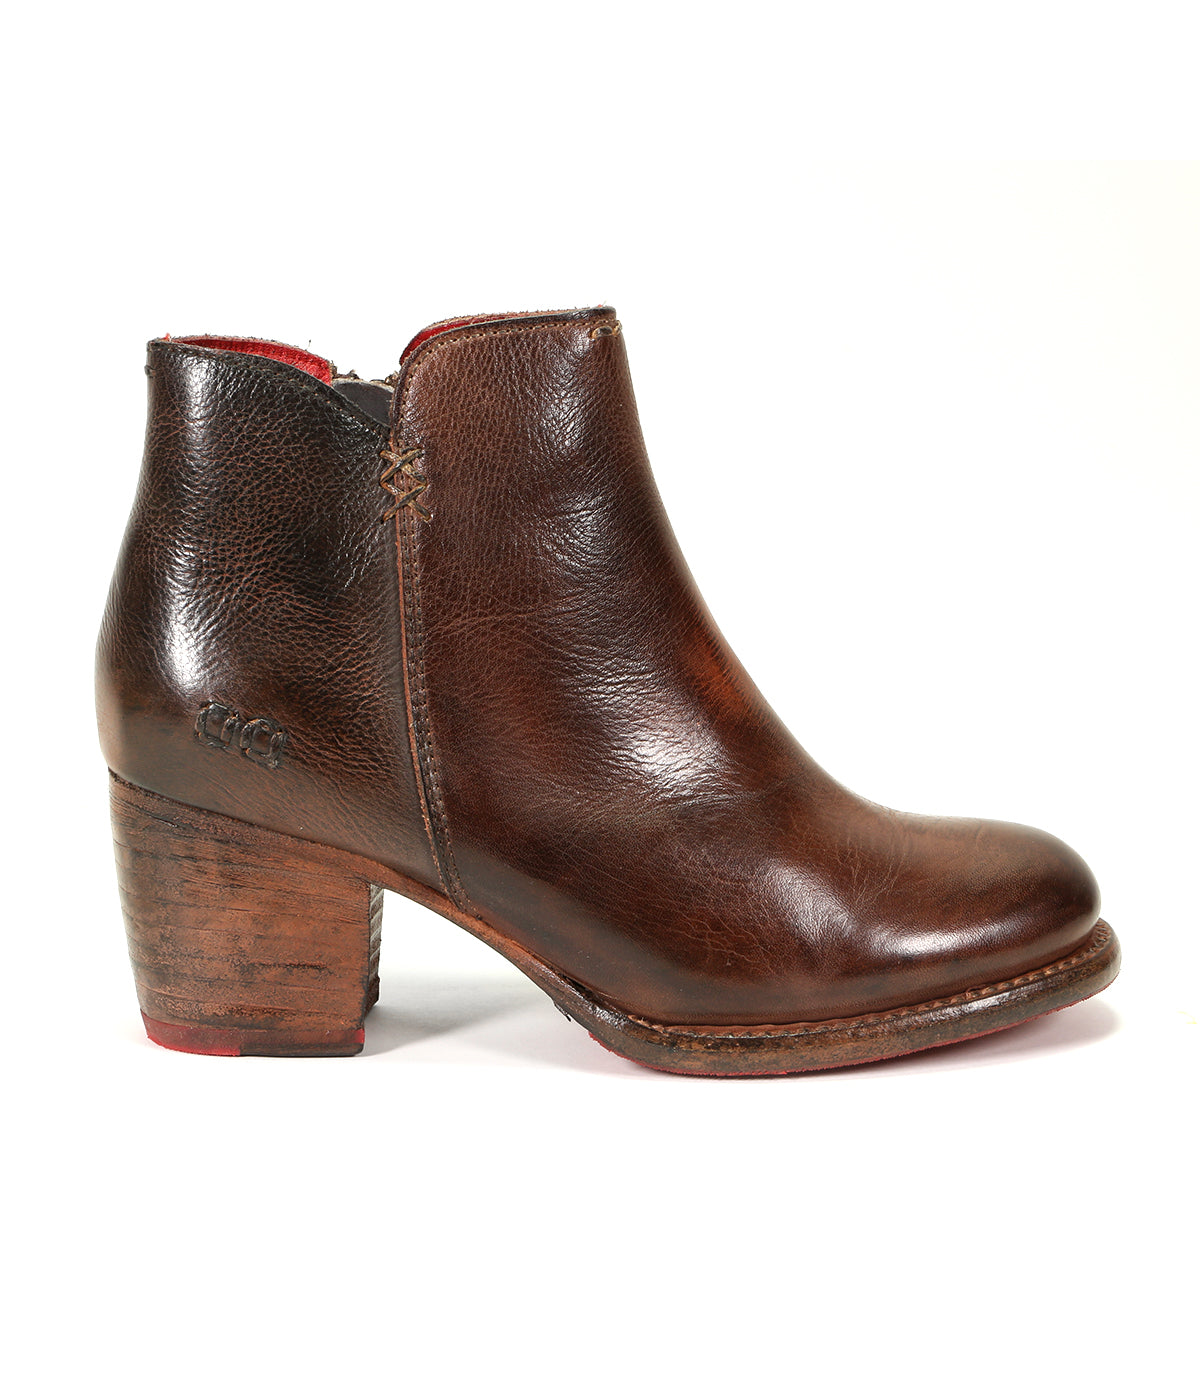 Handmade Bed Stu women's brown leather ankle boots with a durable wooden heel.